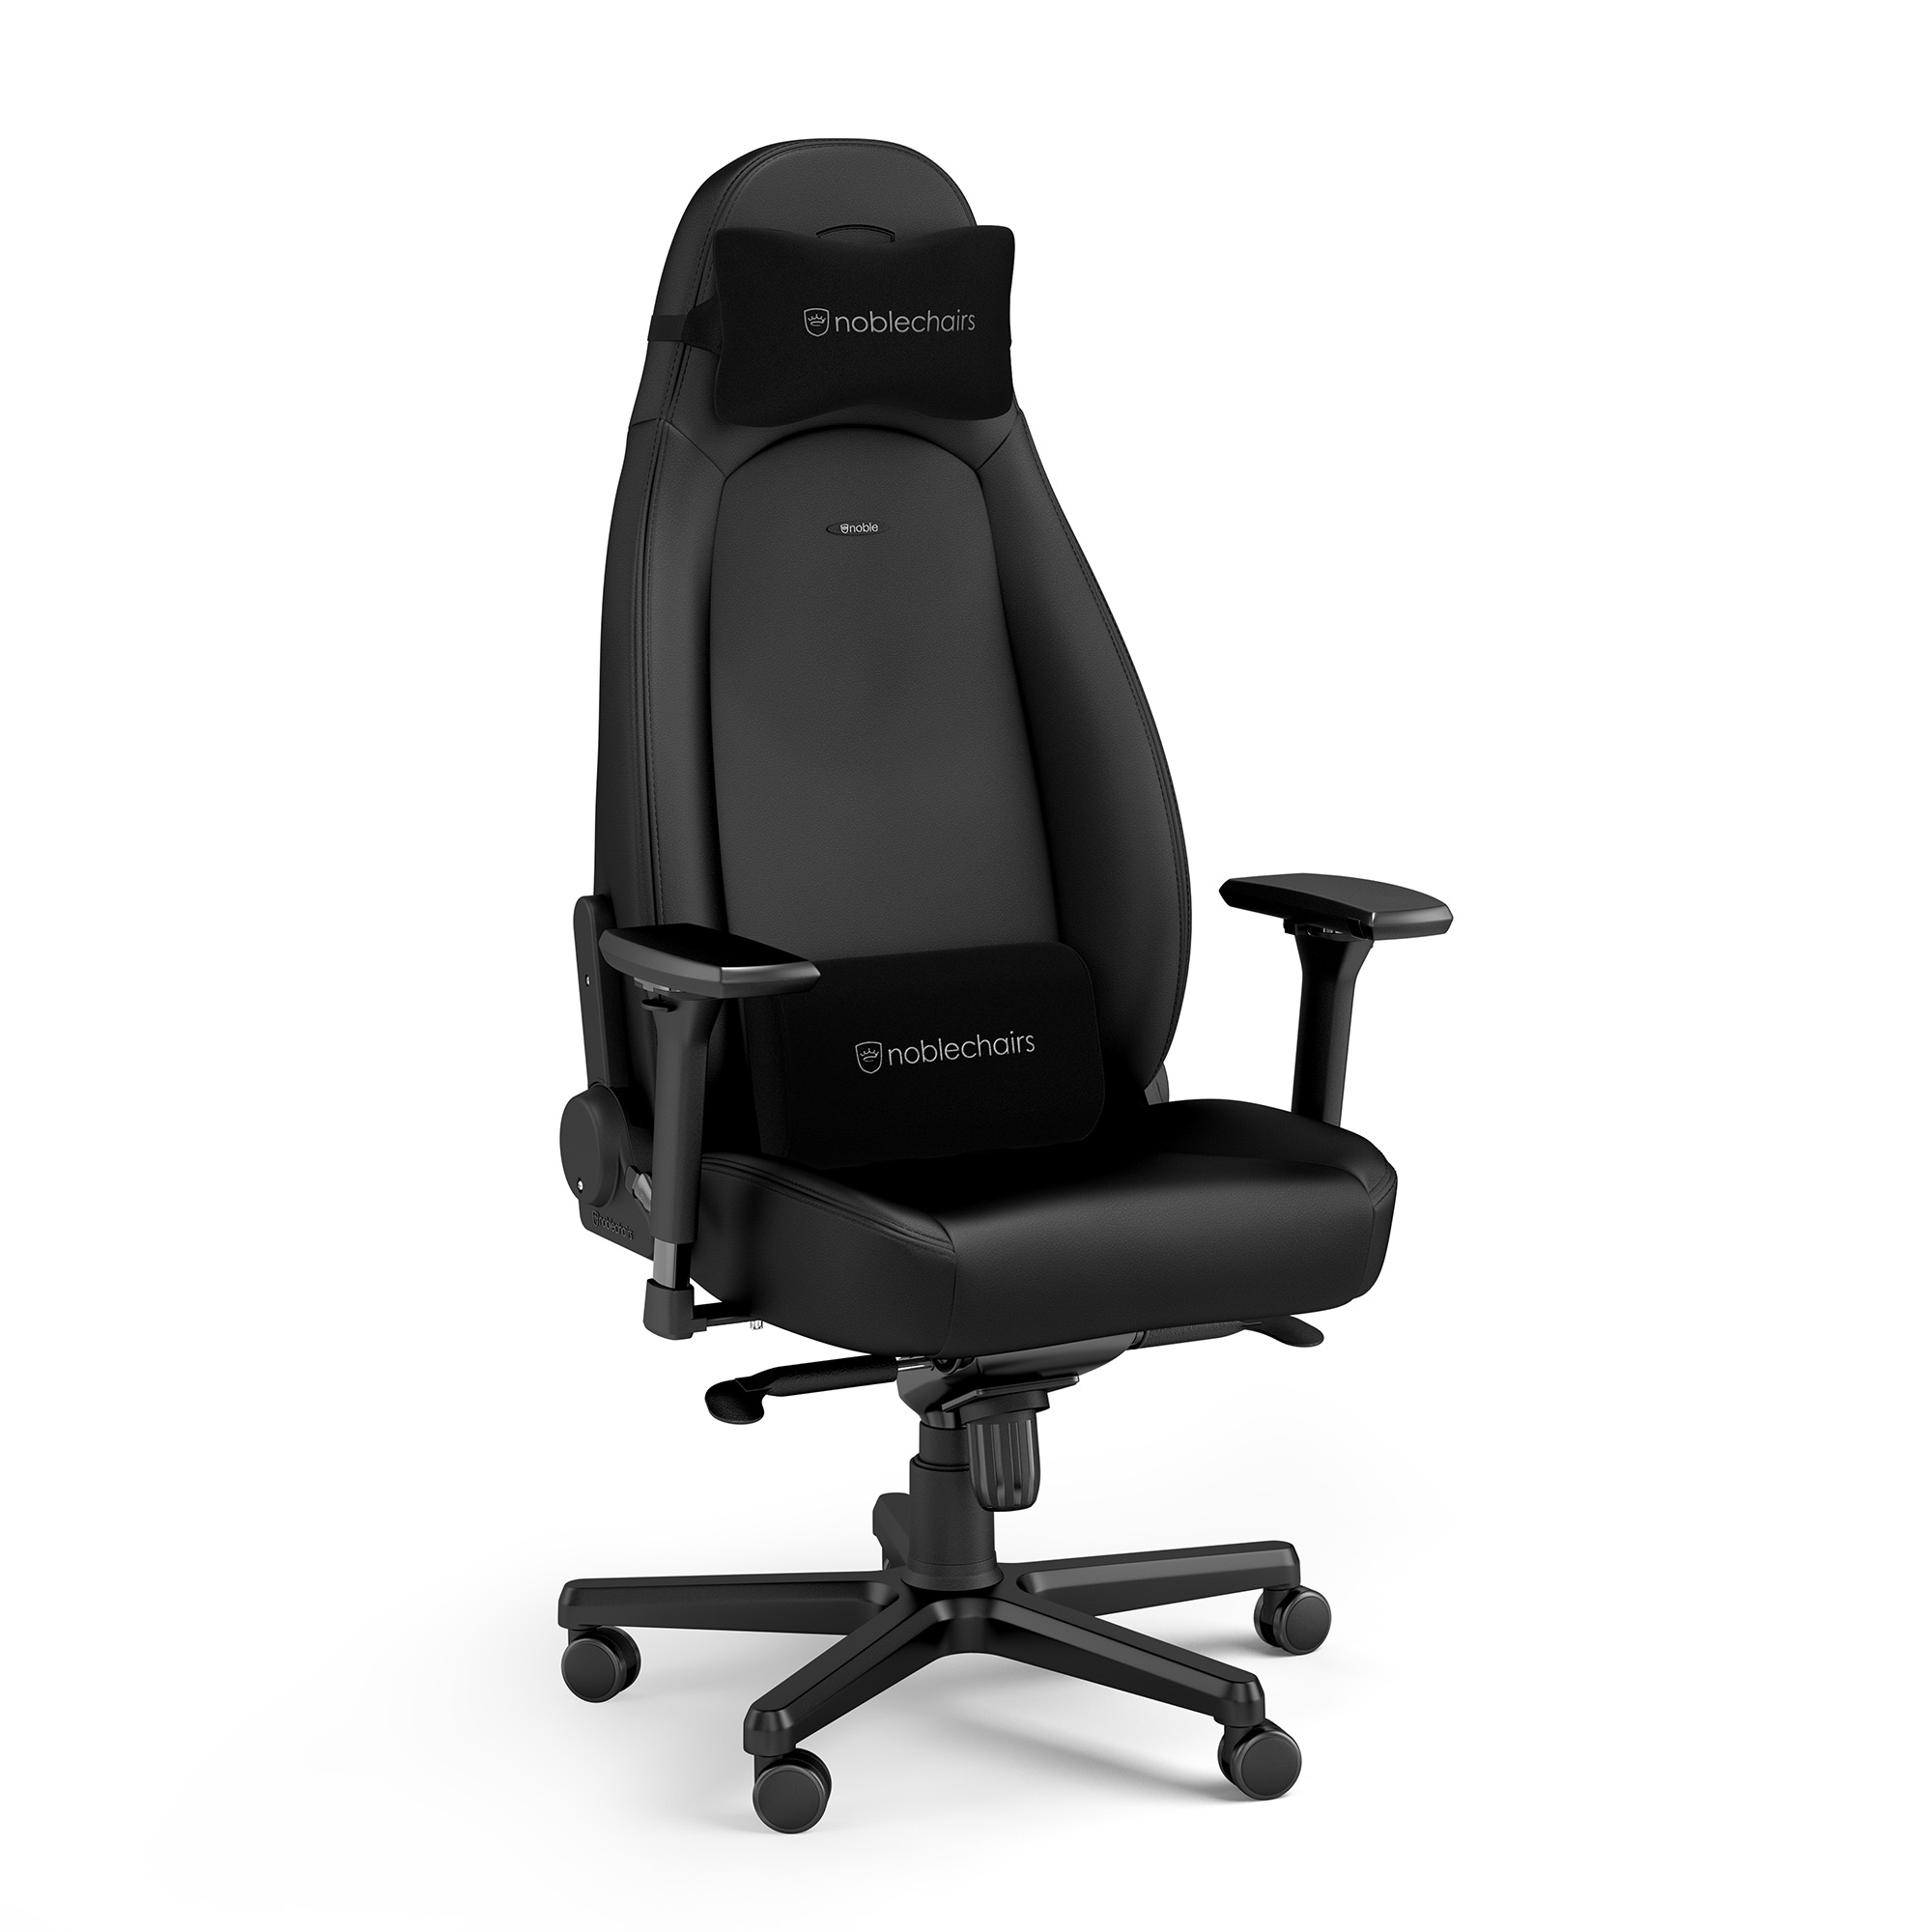 noblechairs - noblechairs ICON Gaming Chair - Black Edition